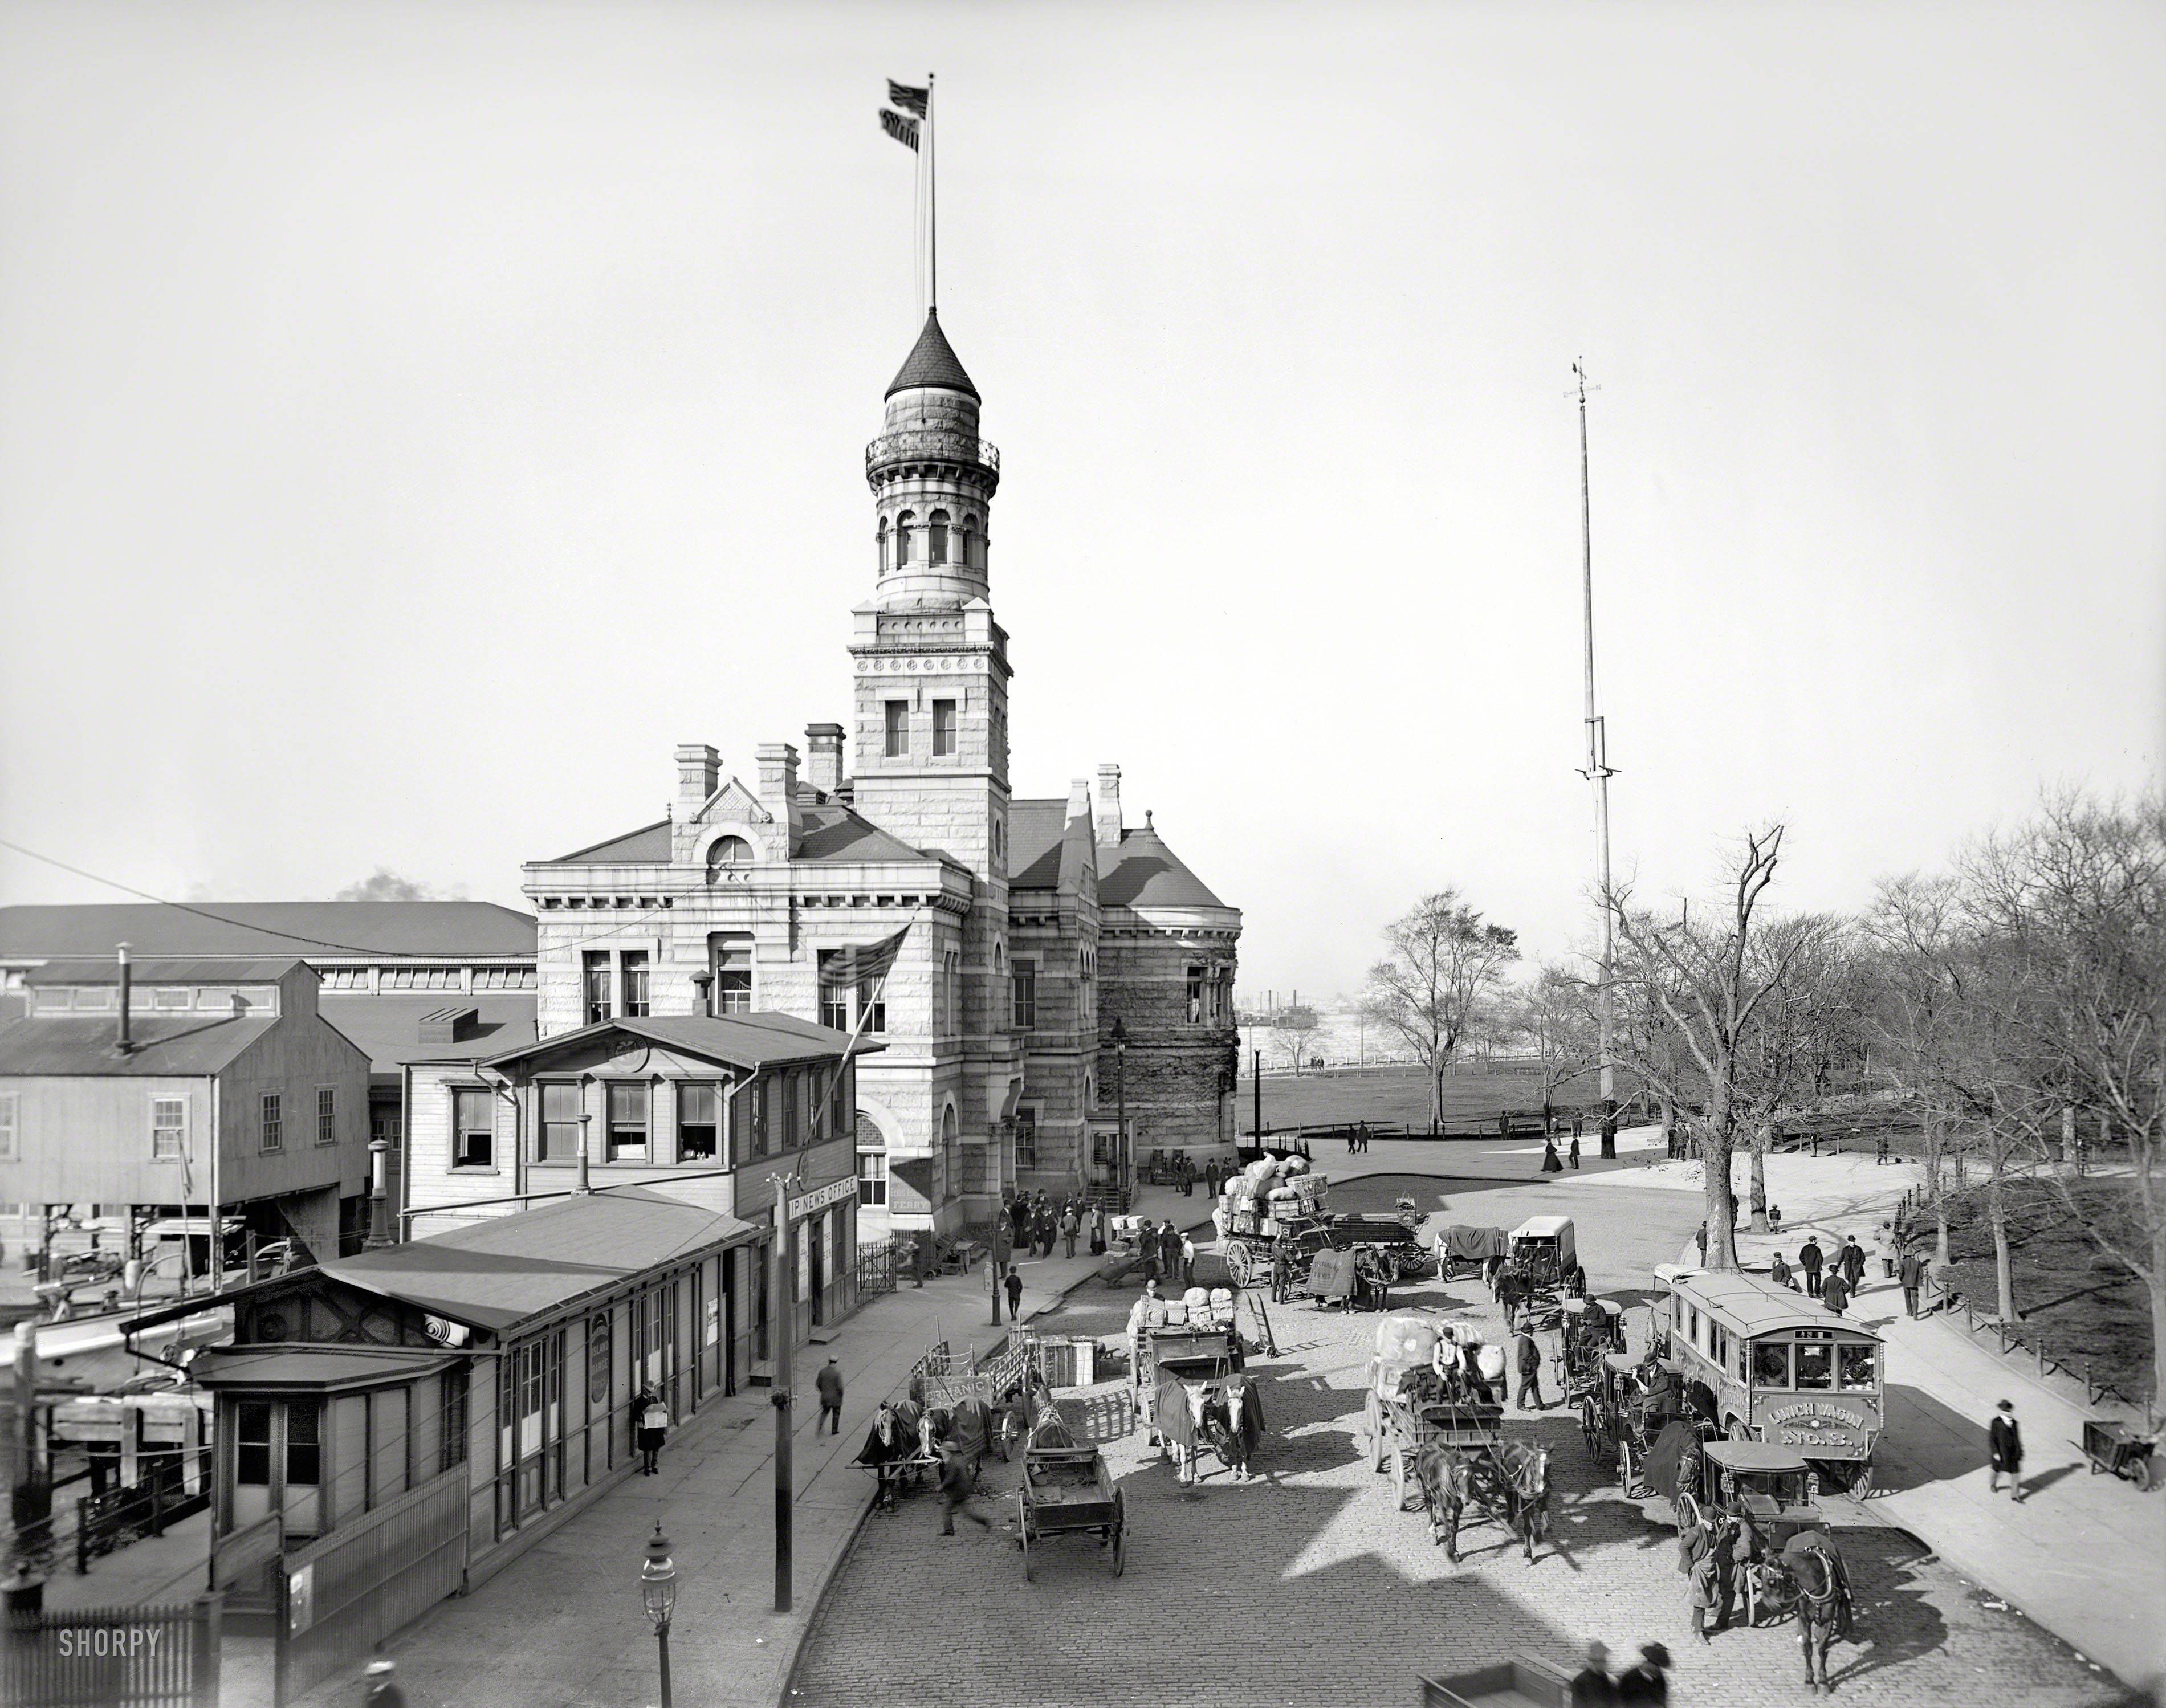 Circa 1900. "Barge Office, New York." Meet you at the Lunch Wagon. 8x10 inch dry plate glass negative, Detroit Photographic Company. View full size.